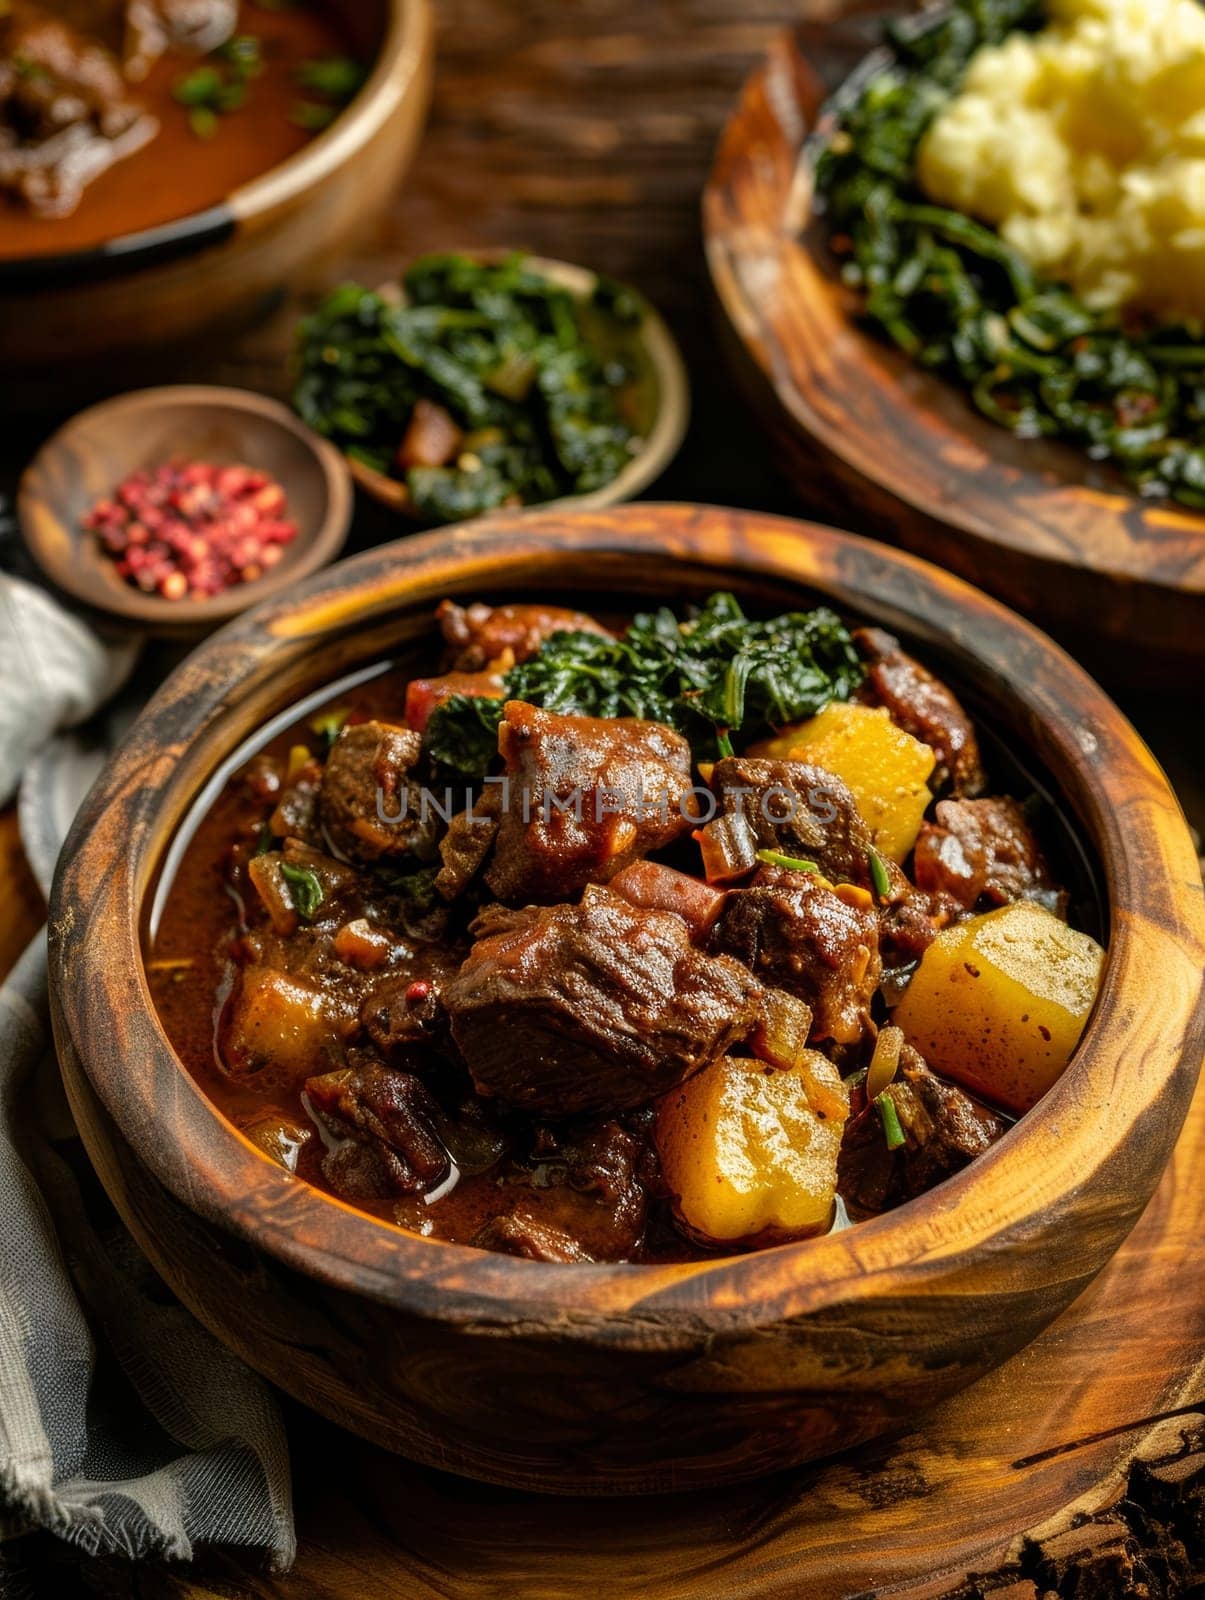 Zimbabwean sadza, a traditional cornmeal porridge, served in a wooden bowl with a side of greens and meat stew. This ethnic comfort food showcases the staple ingredients and homestyle cooking. by sfinks